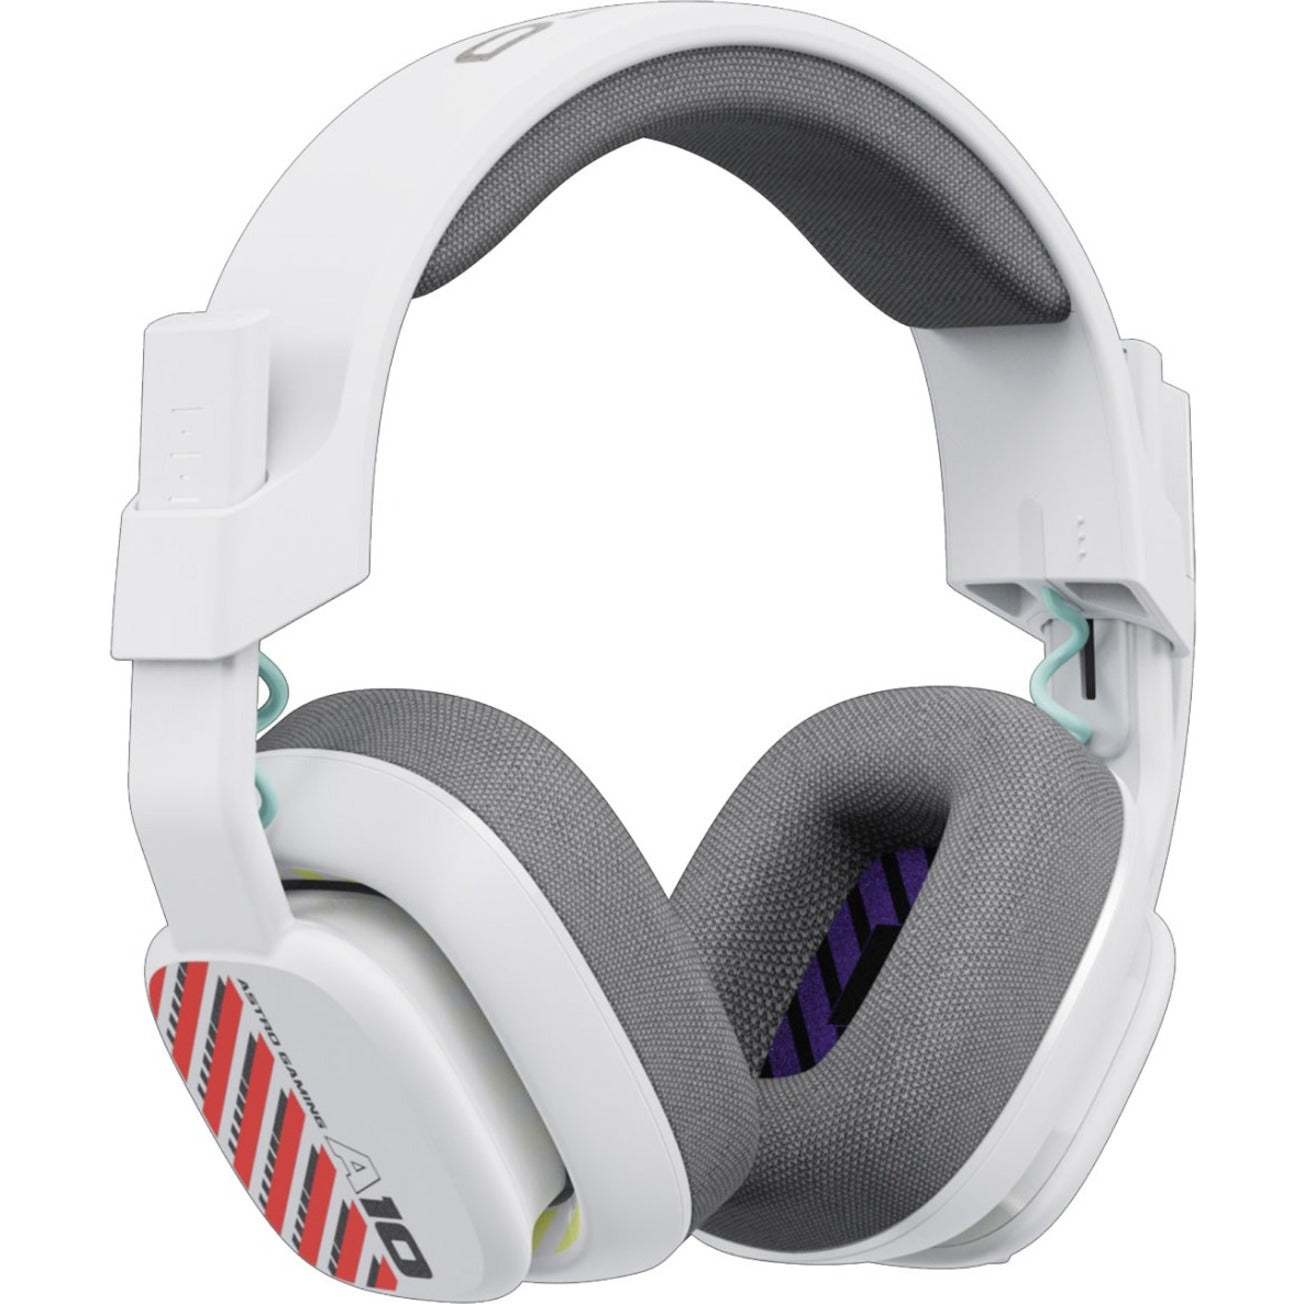 Astro 939-002050 A10 Headset Xbox - White, Durable, Uni-directional Microphone, Wired Gaming Headset